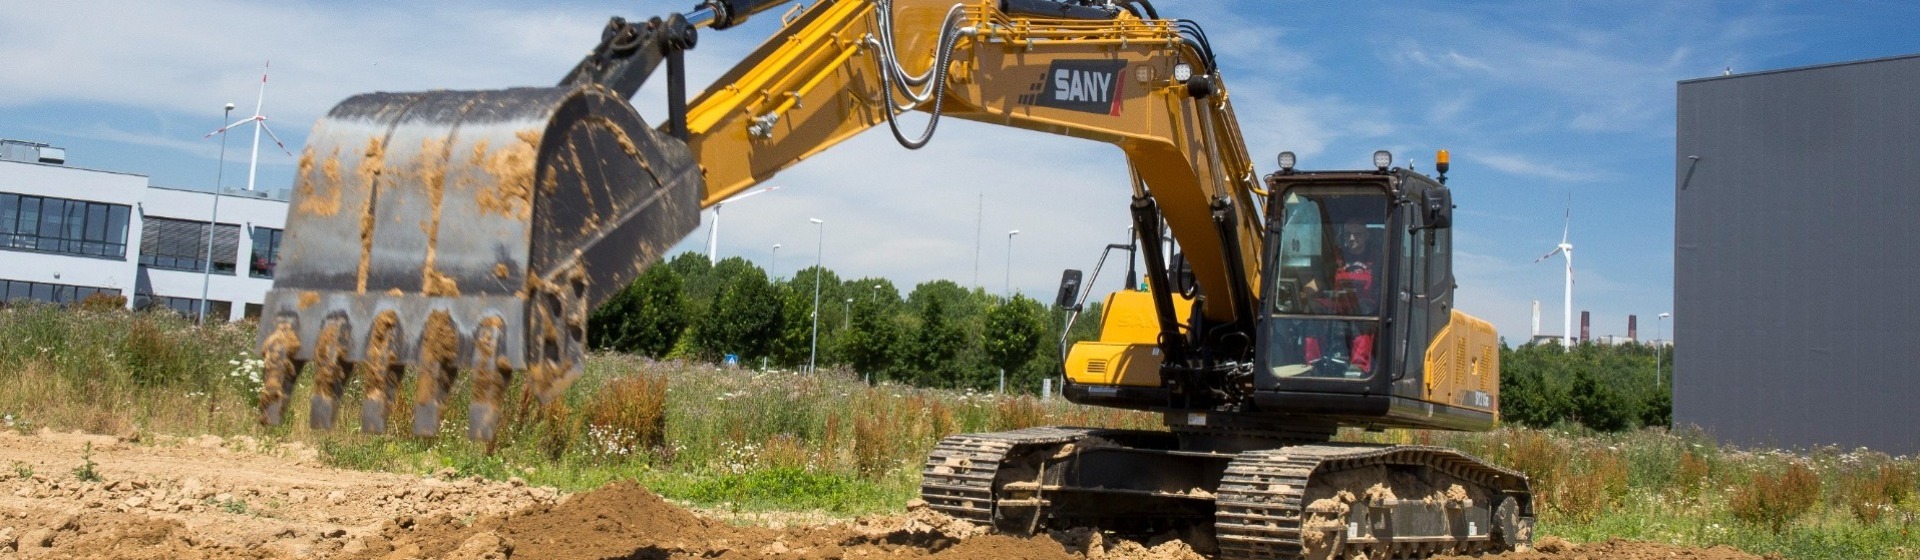 What Is An Excavator & How Does It Work?